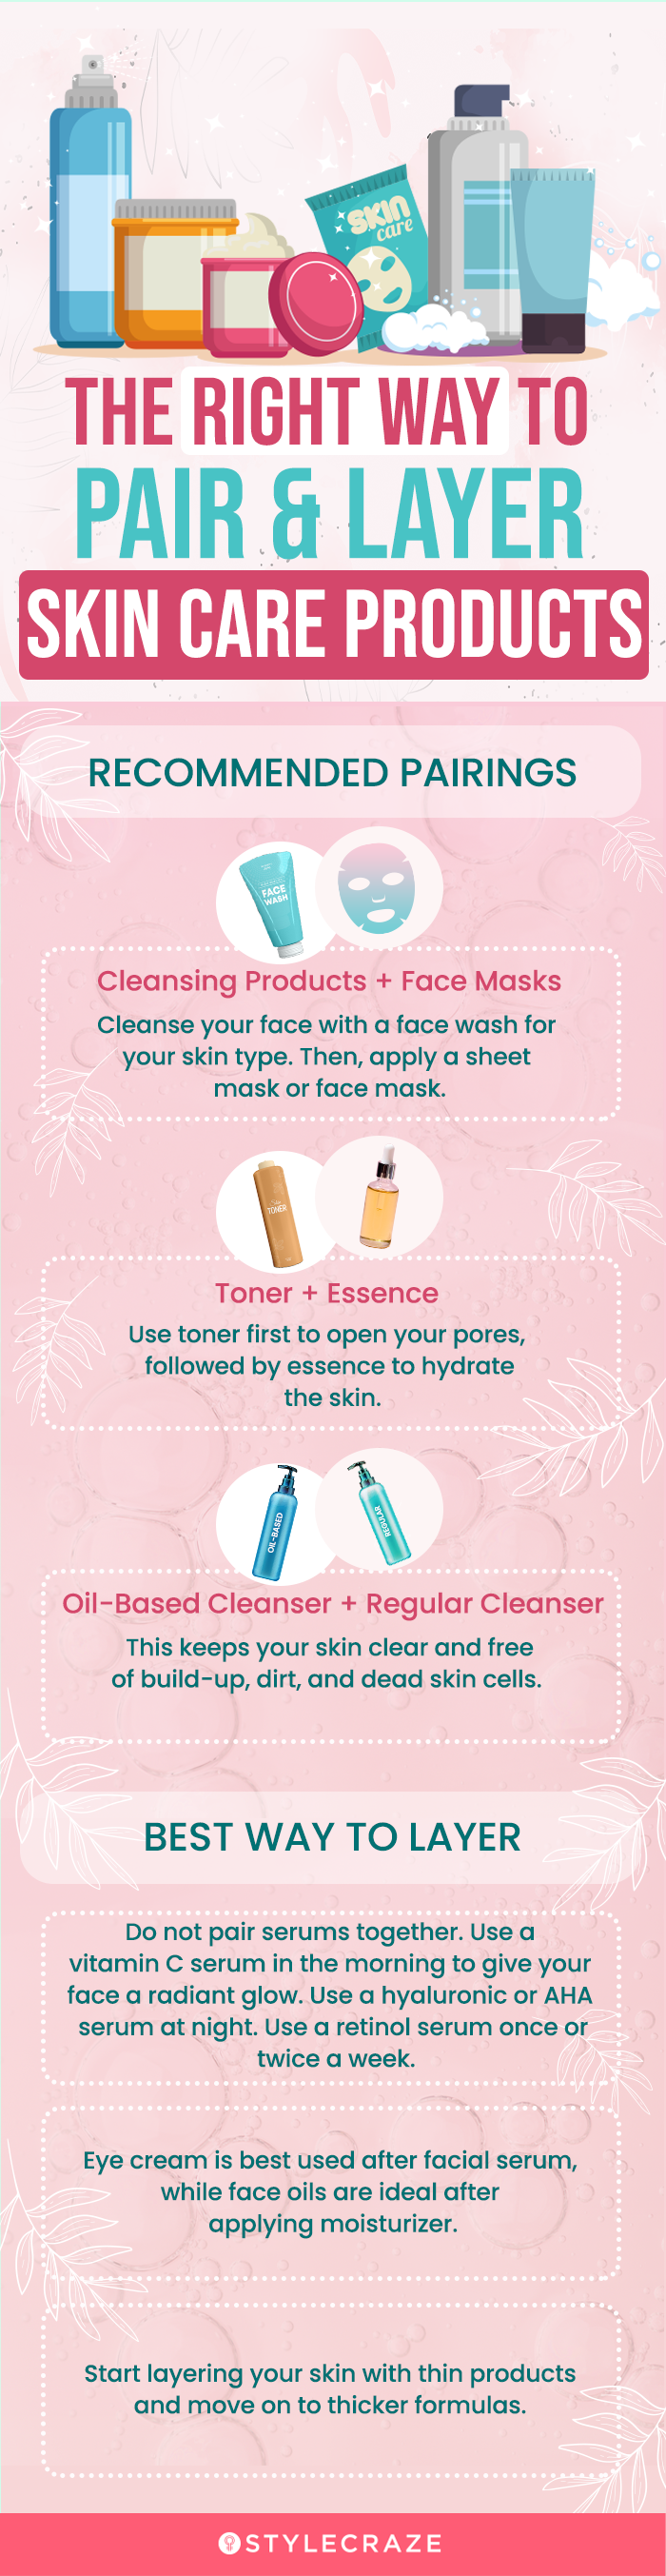 the right way to pair & layer skin care products (infographic)